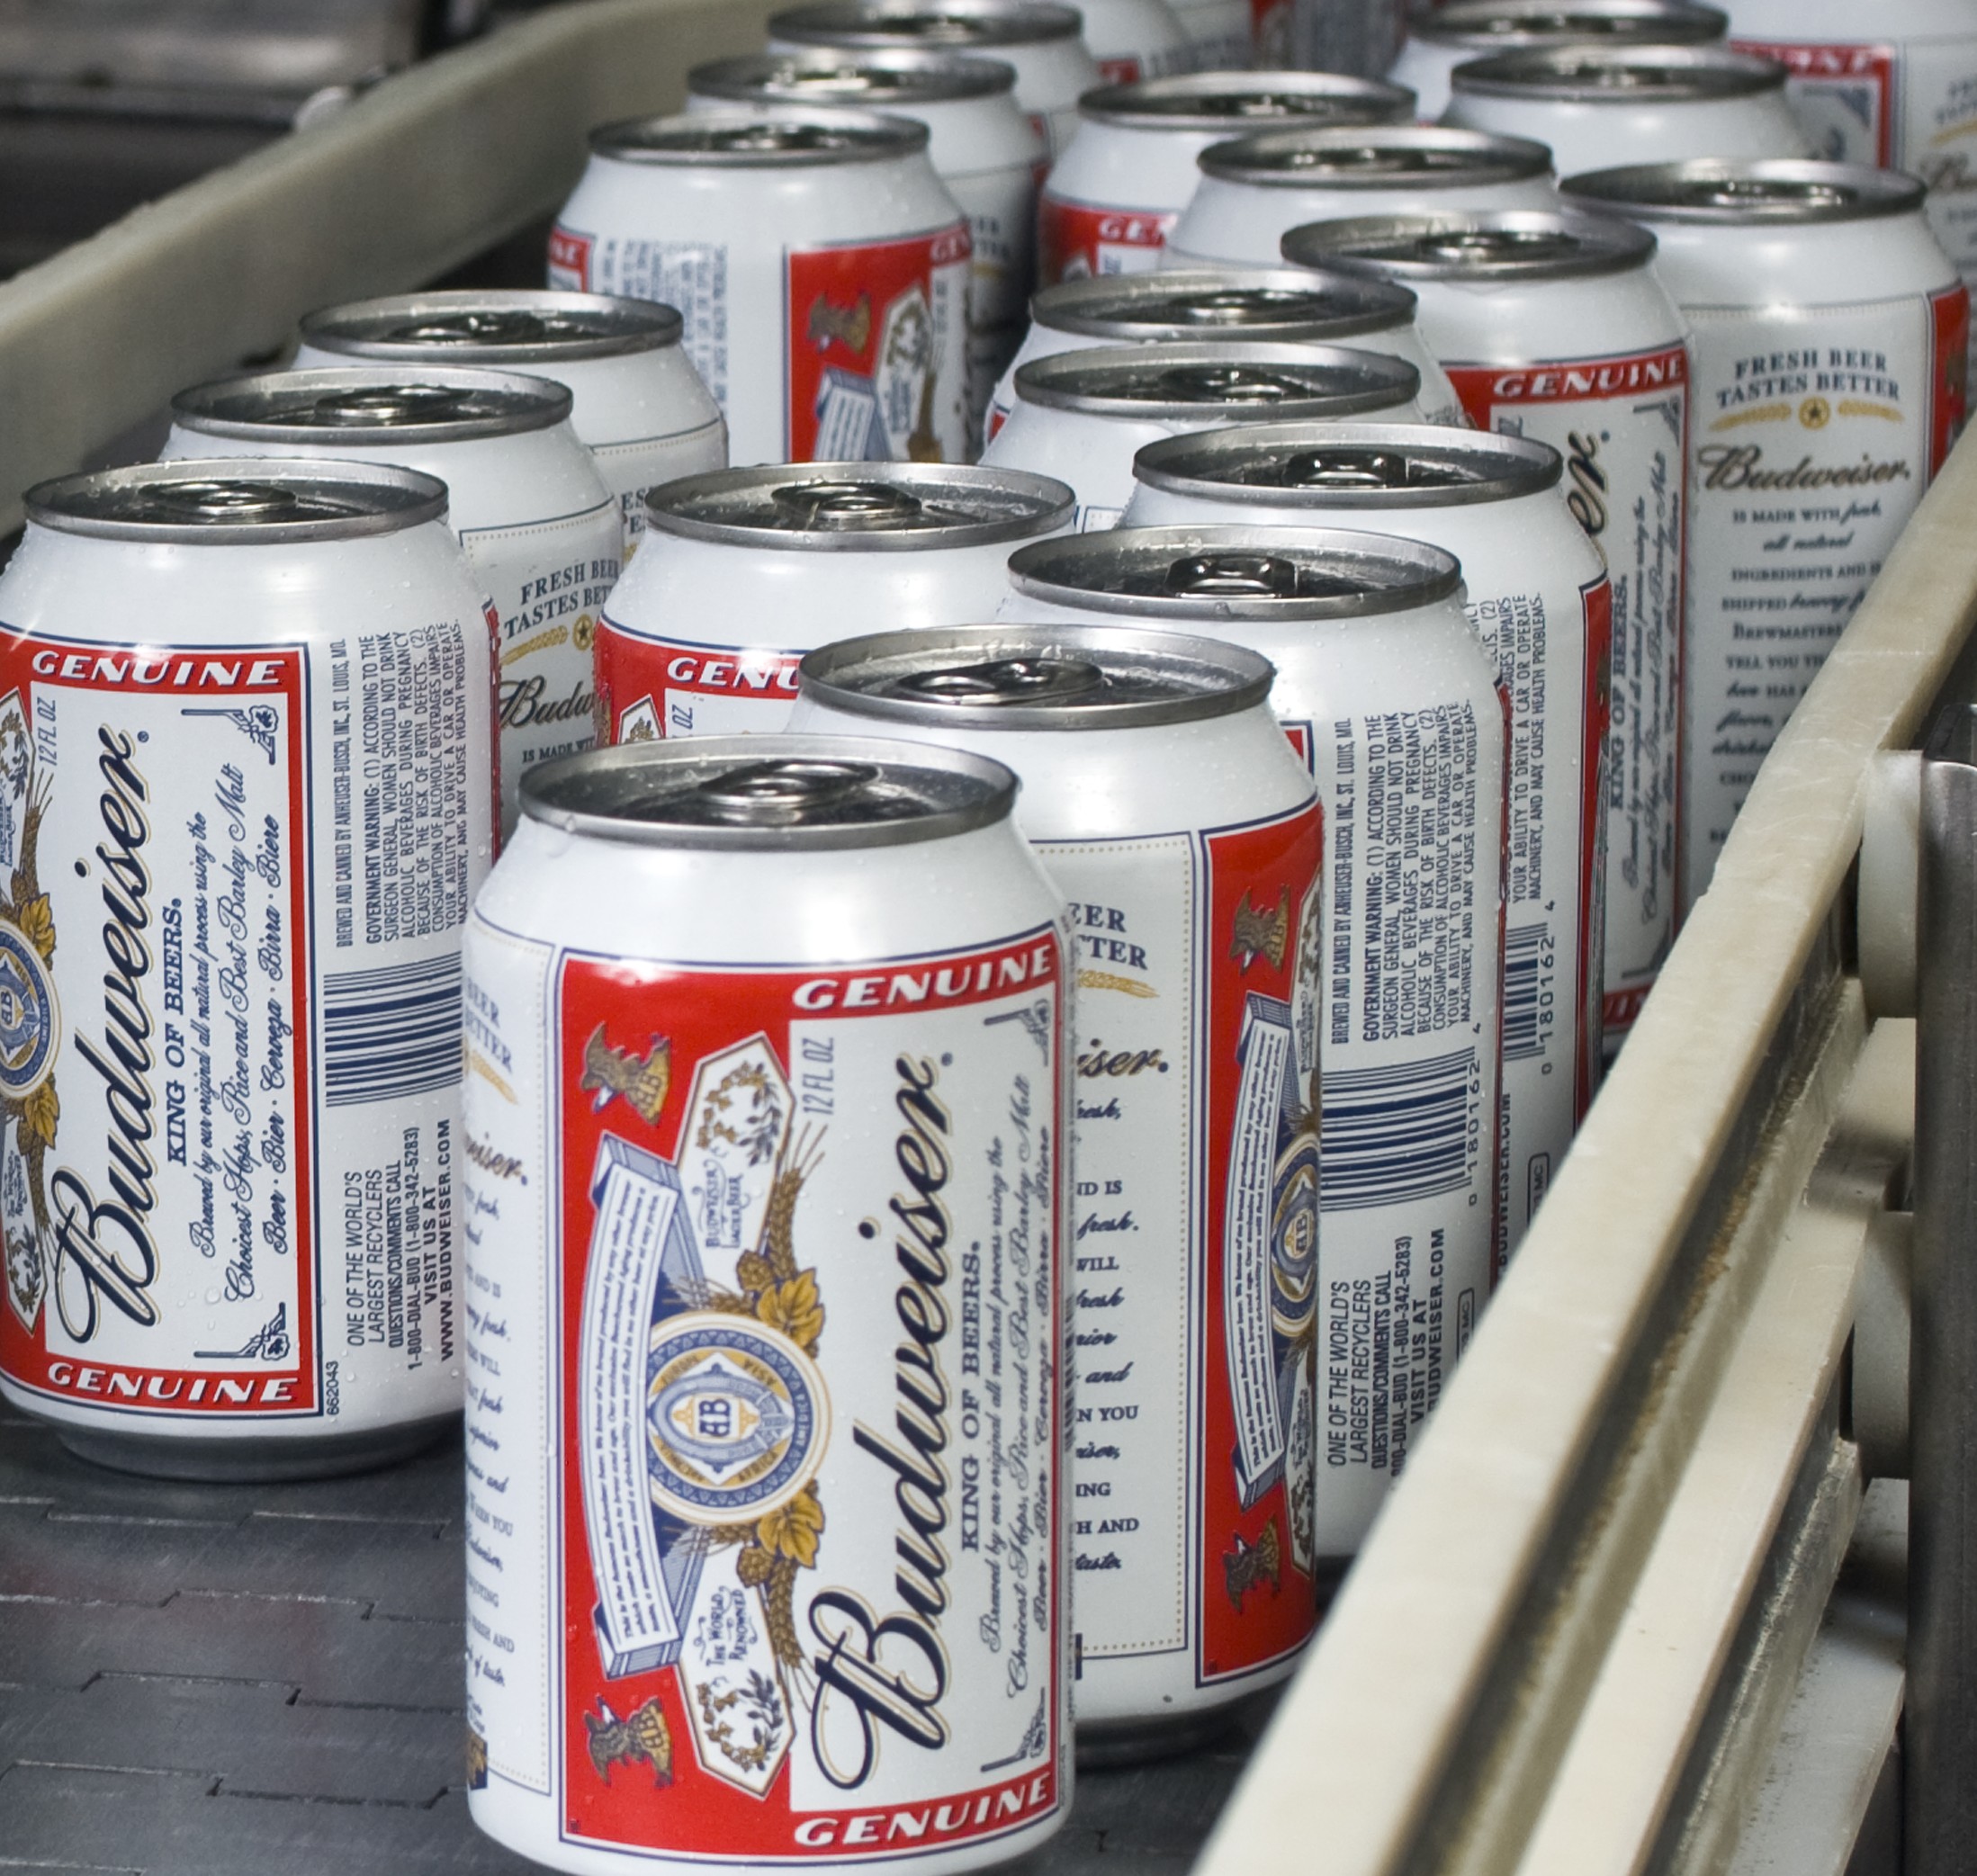 Starting Today, Every Budweiser Sold Through July 4 Will Benefit Military Families